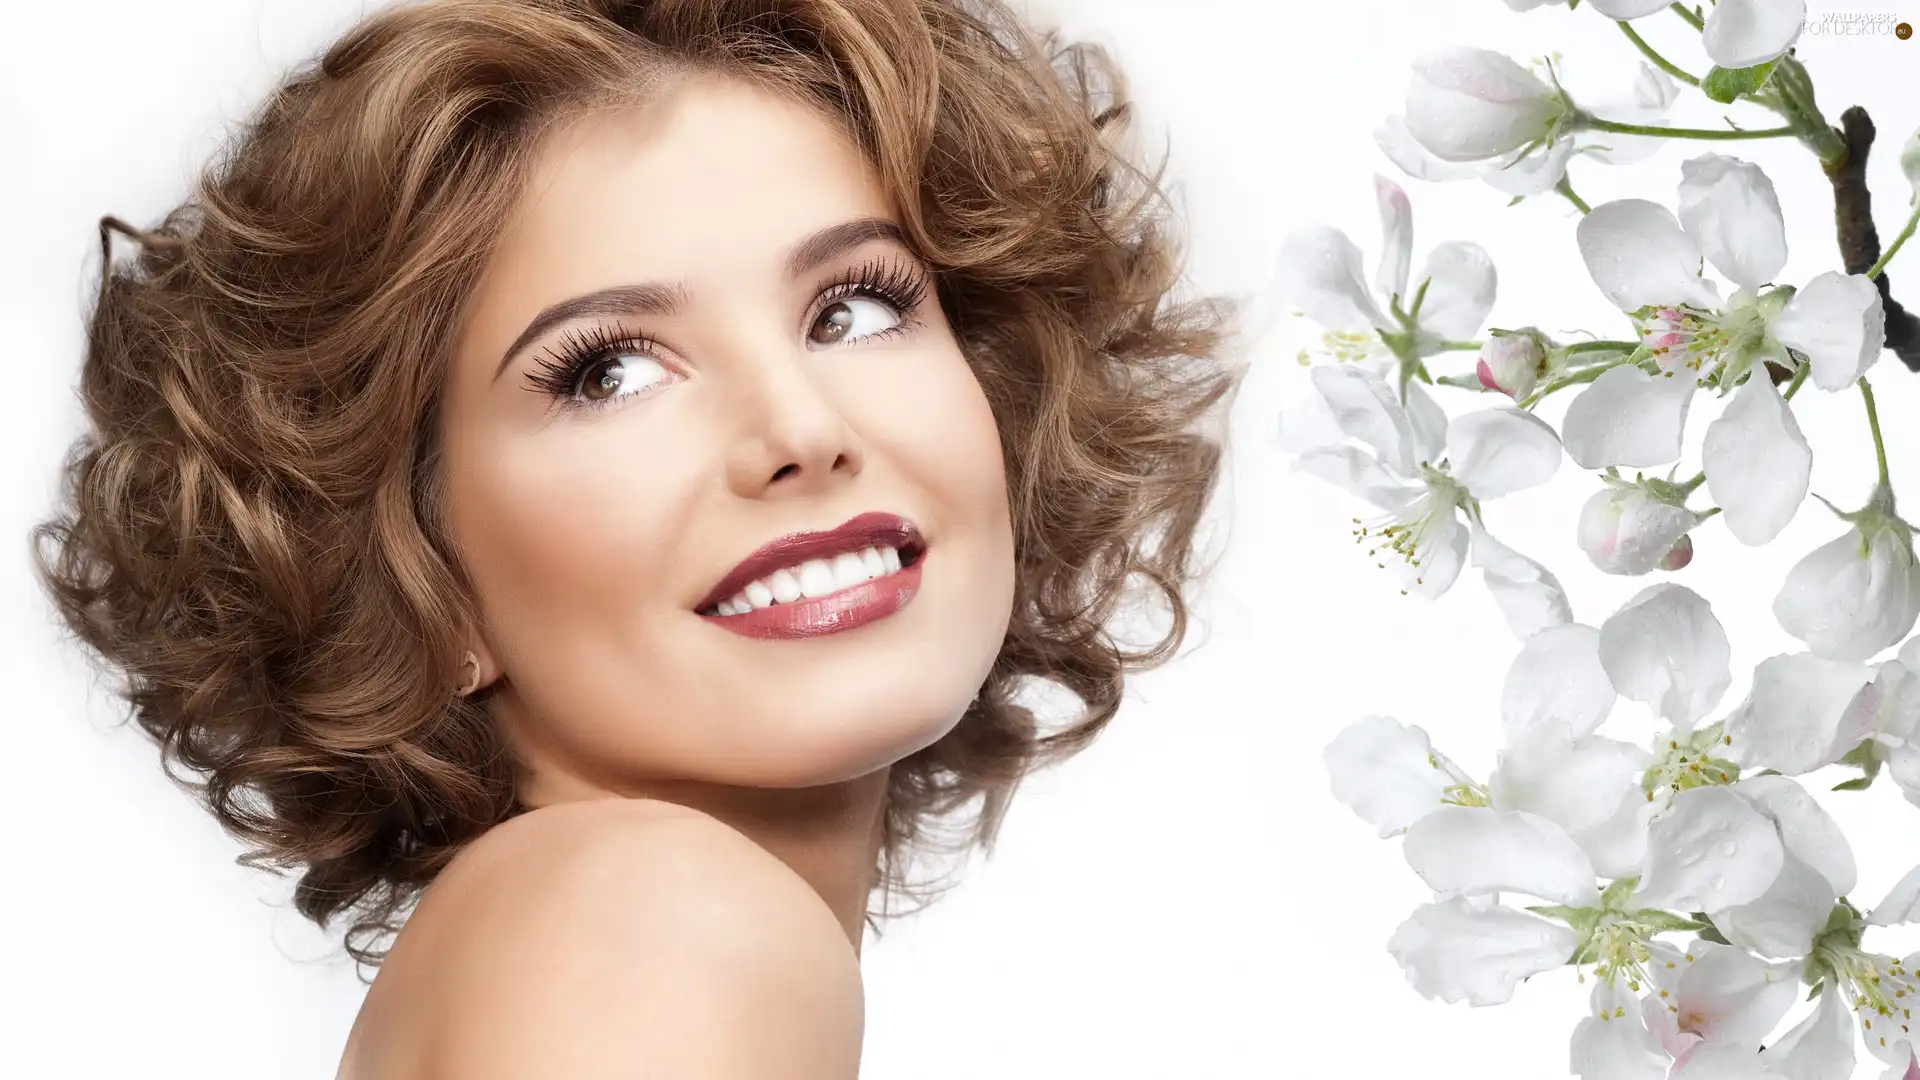 make-up, Brown, Flowers, Eyes, The look, face, Women, Smile